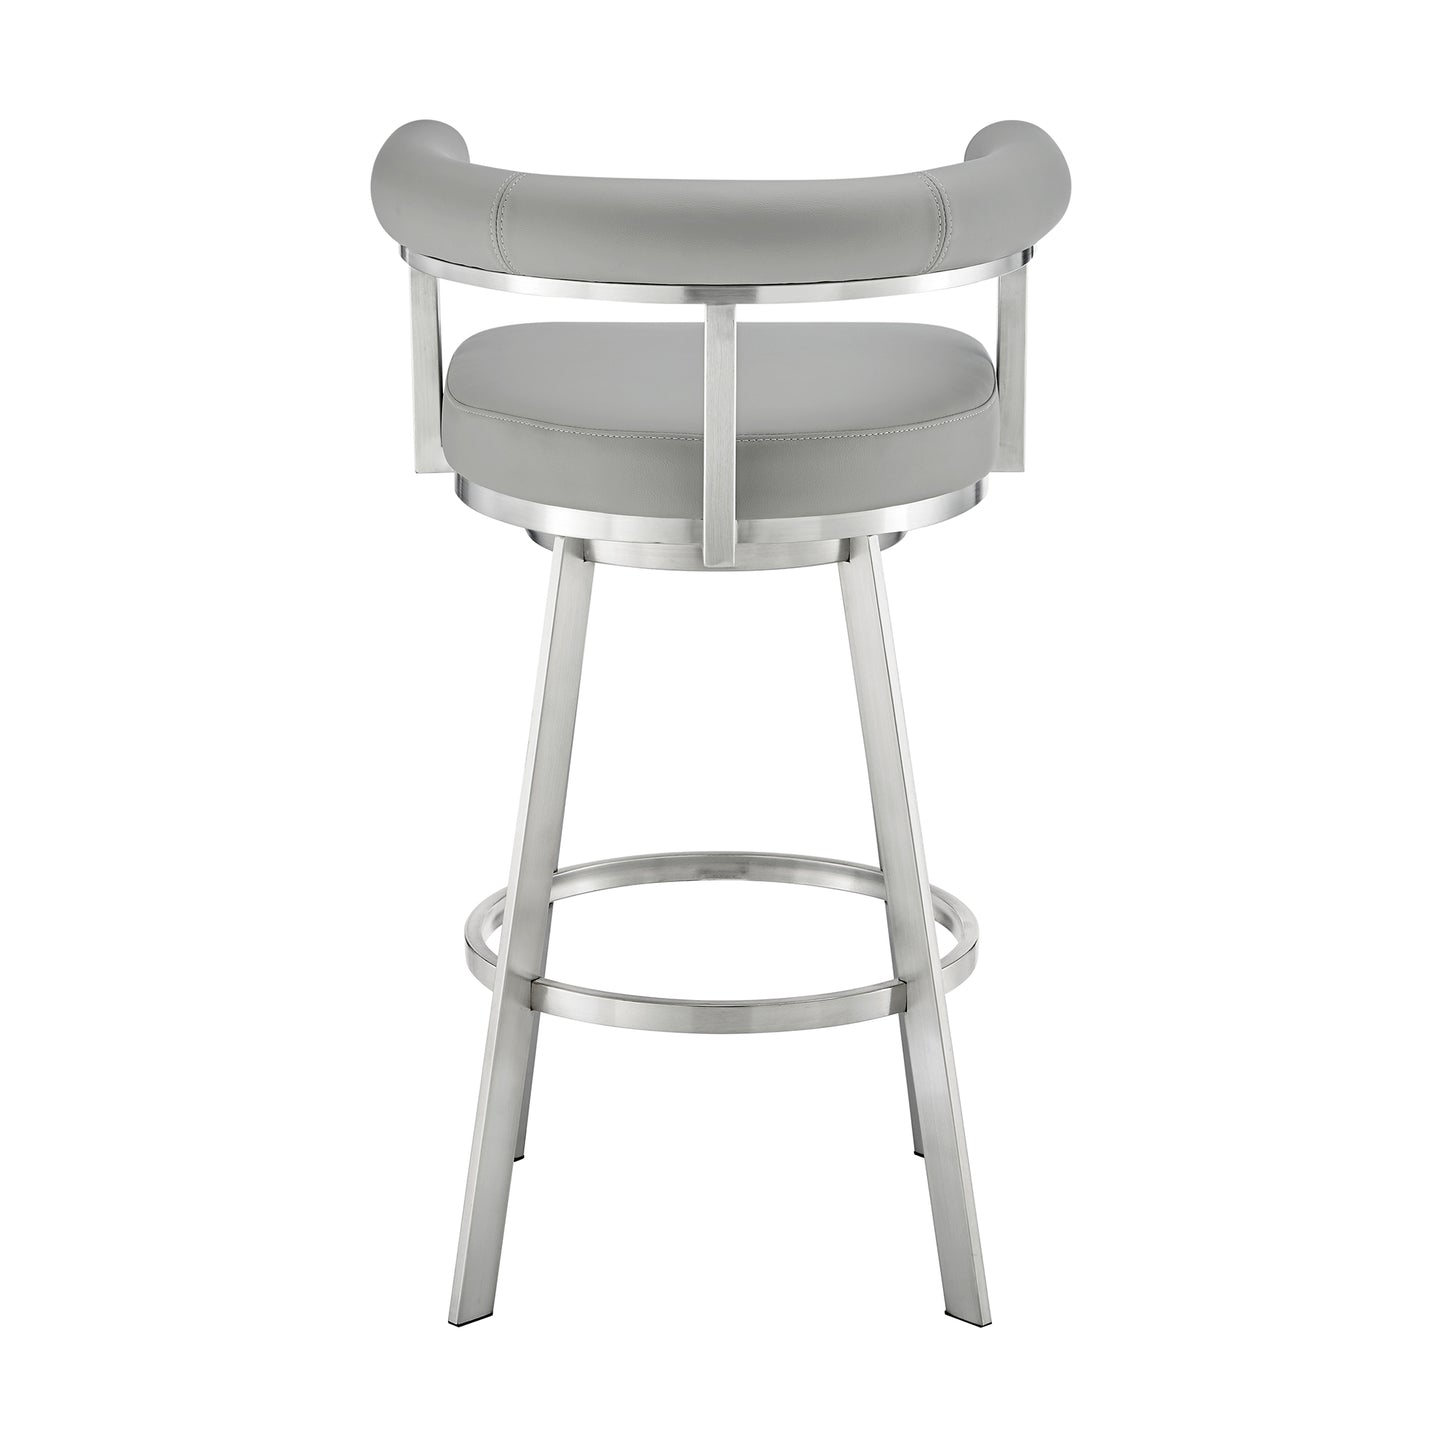 Magnolia 30" Swivel Bar Stool in Brushed Stainless Steel with Light Gray Faux Leather